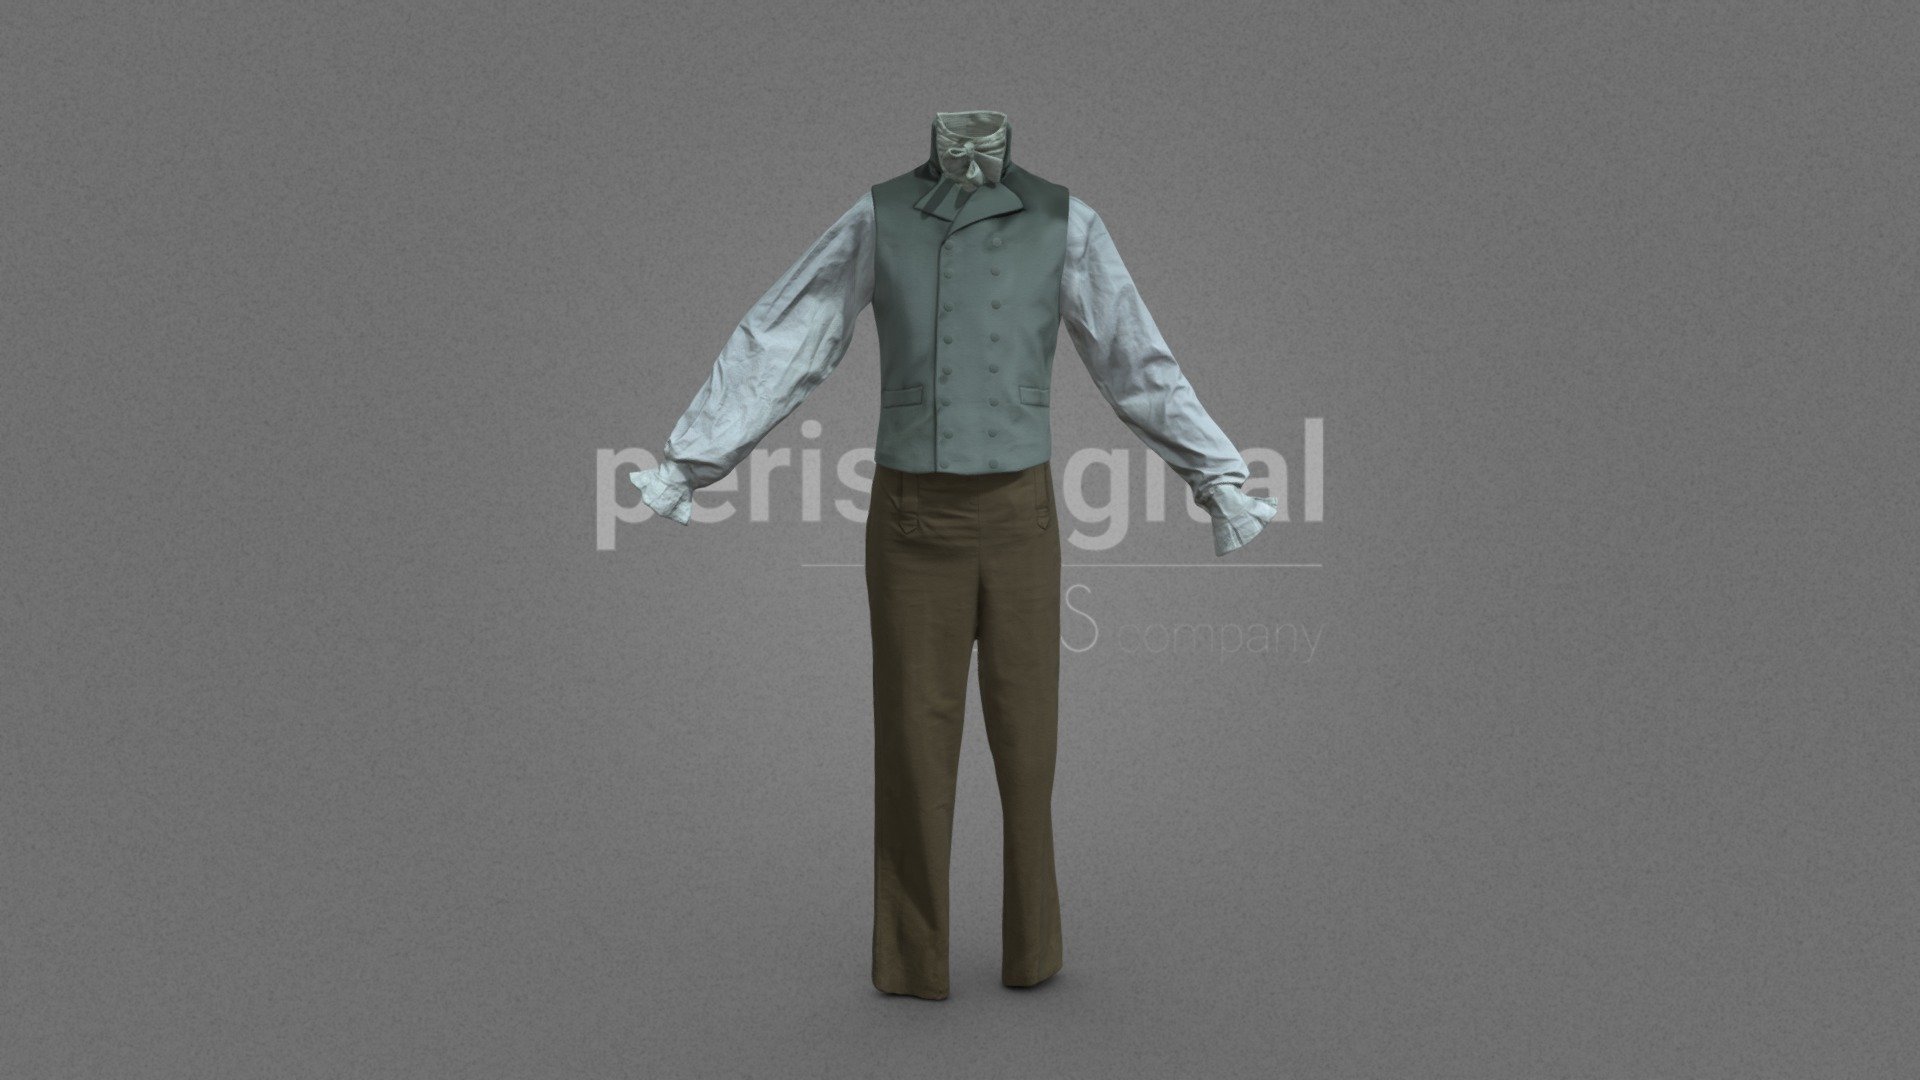 Suit S.XIX 

PERIS DIGITAL MEDIUM QUALITY 3D CLOTHING They are optimized for use in medium/high poly 3D scenes and optimized for rendering. We have included in AddiotionalFiles, the texture maps in high resolution, as well as the Displacement maps in high resolution too, so you can perform extreme point of view with your 3D cameras. With the Blender file (included in AdditionalFiles) you will be able to edit any aspect of the set . Enjoy it!

Web: https://peris.digital/ - Crowd Cloth Series - Model 009 - 3D model by Peris Digital (@perisdigital) 3d model